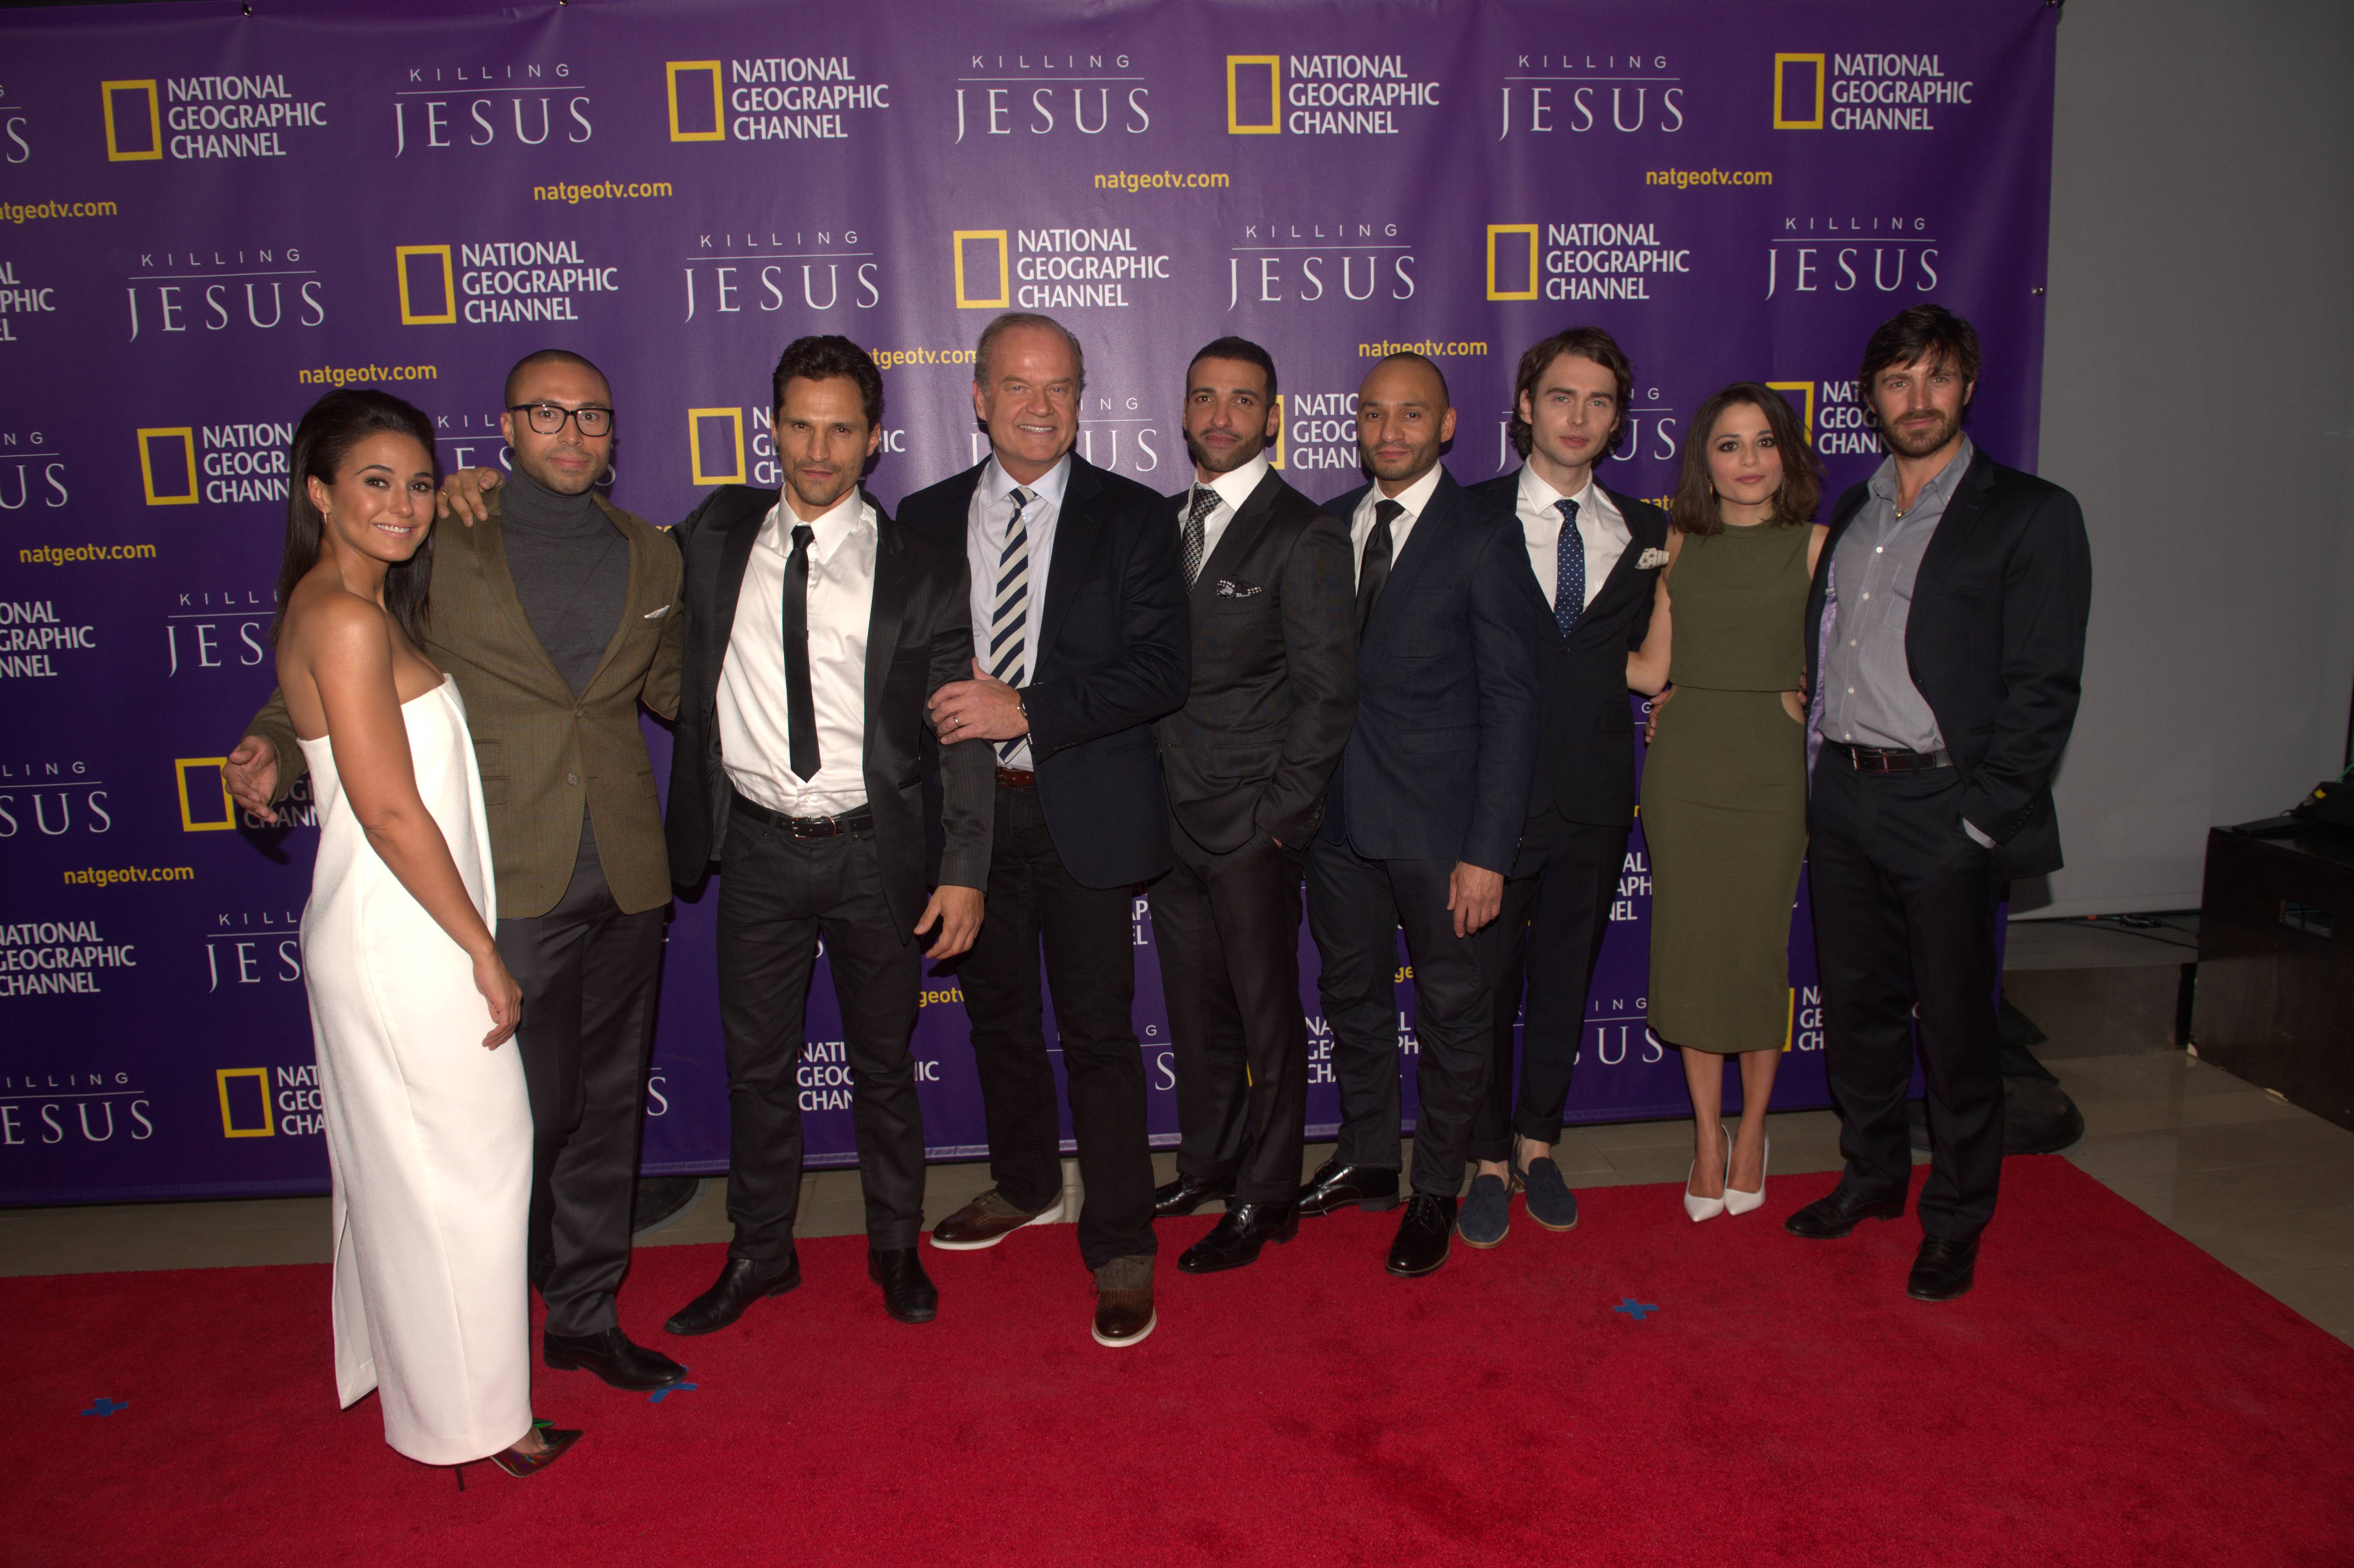 'KILLING JESUS' Cast on Red Carpet at premiere of 'Killing Jesus' New York at the Lincoln Centre